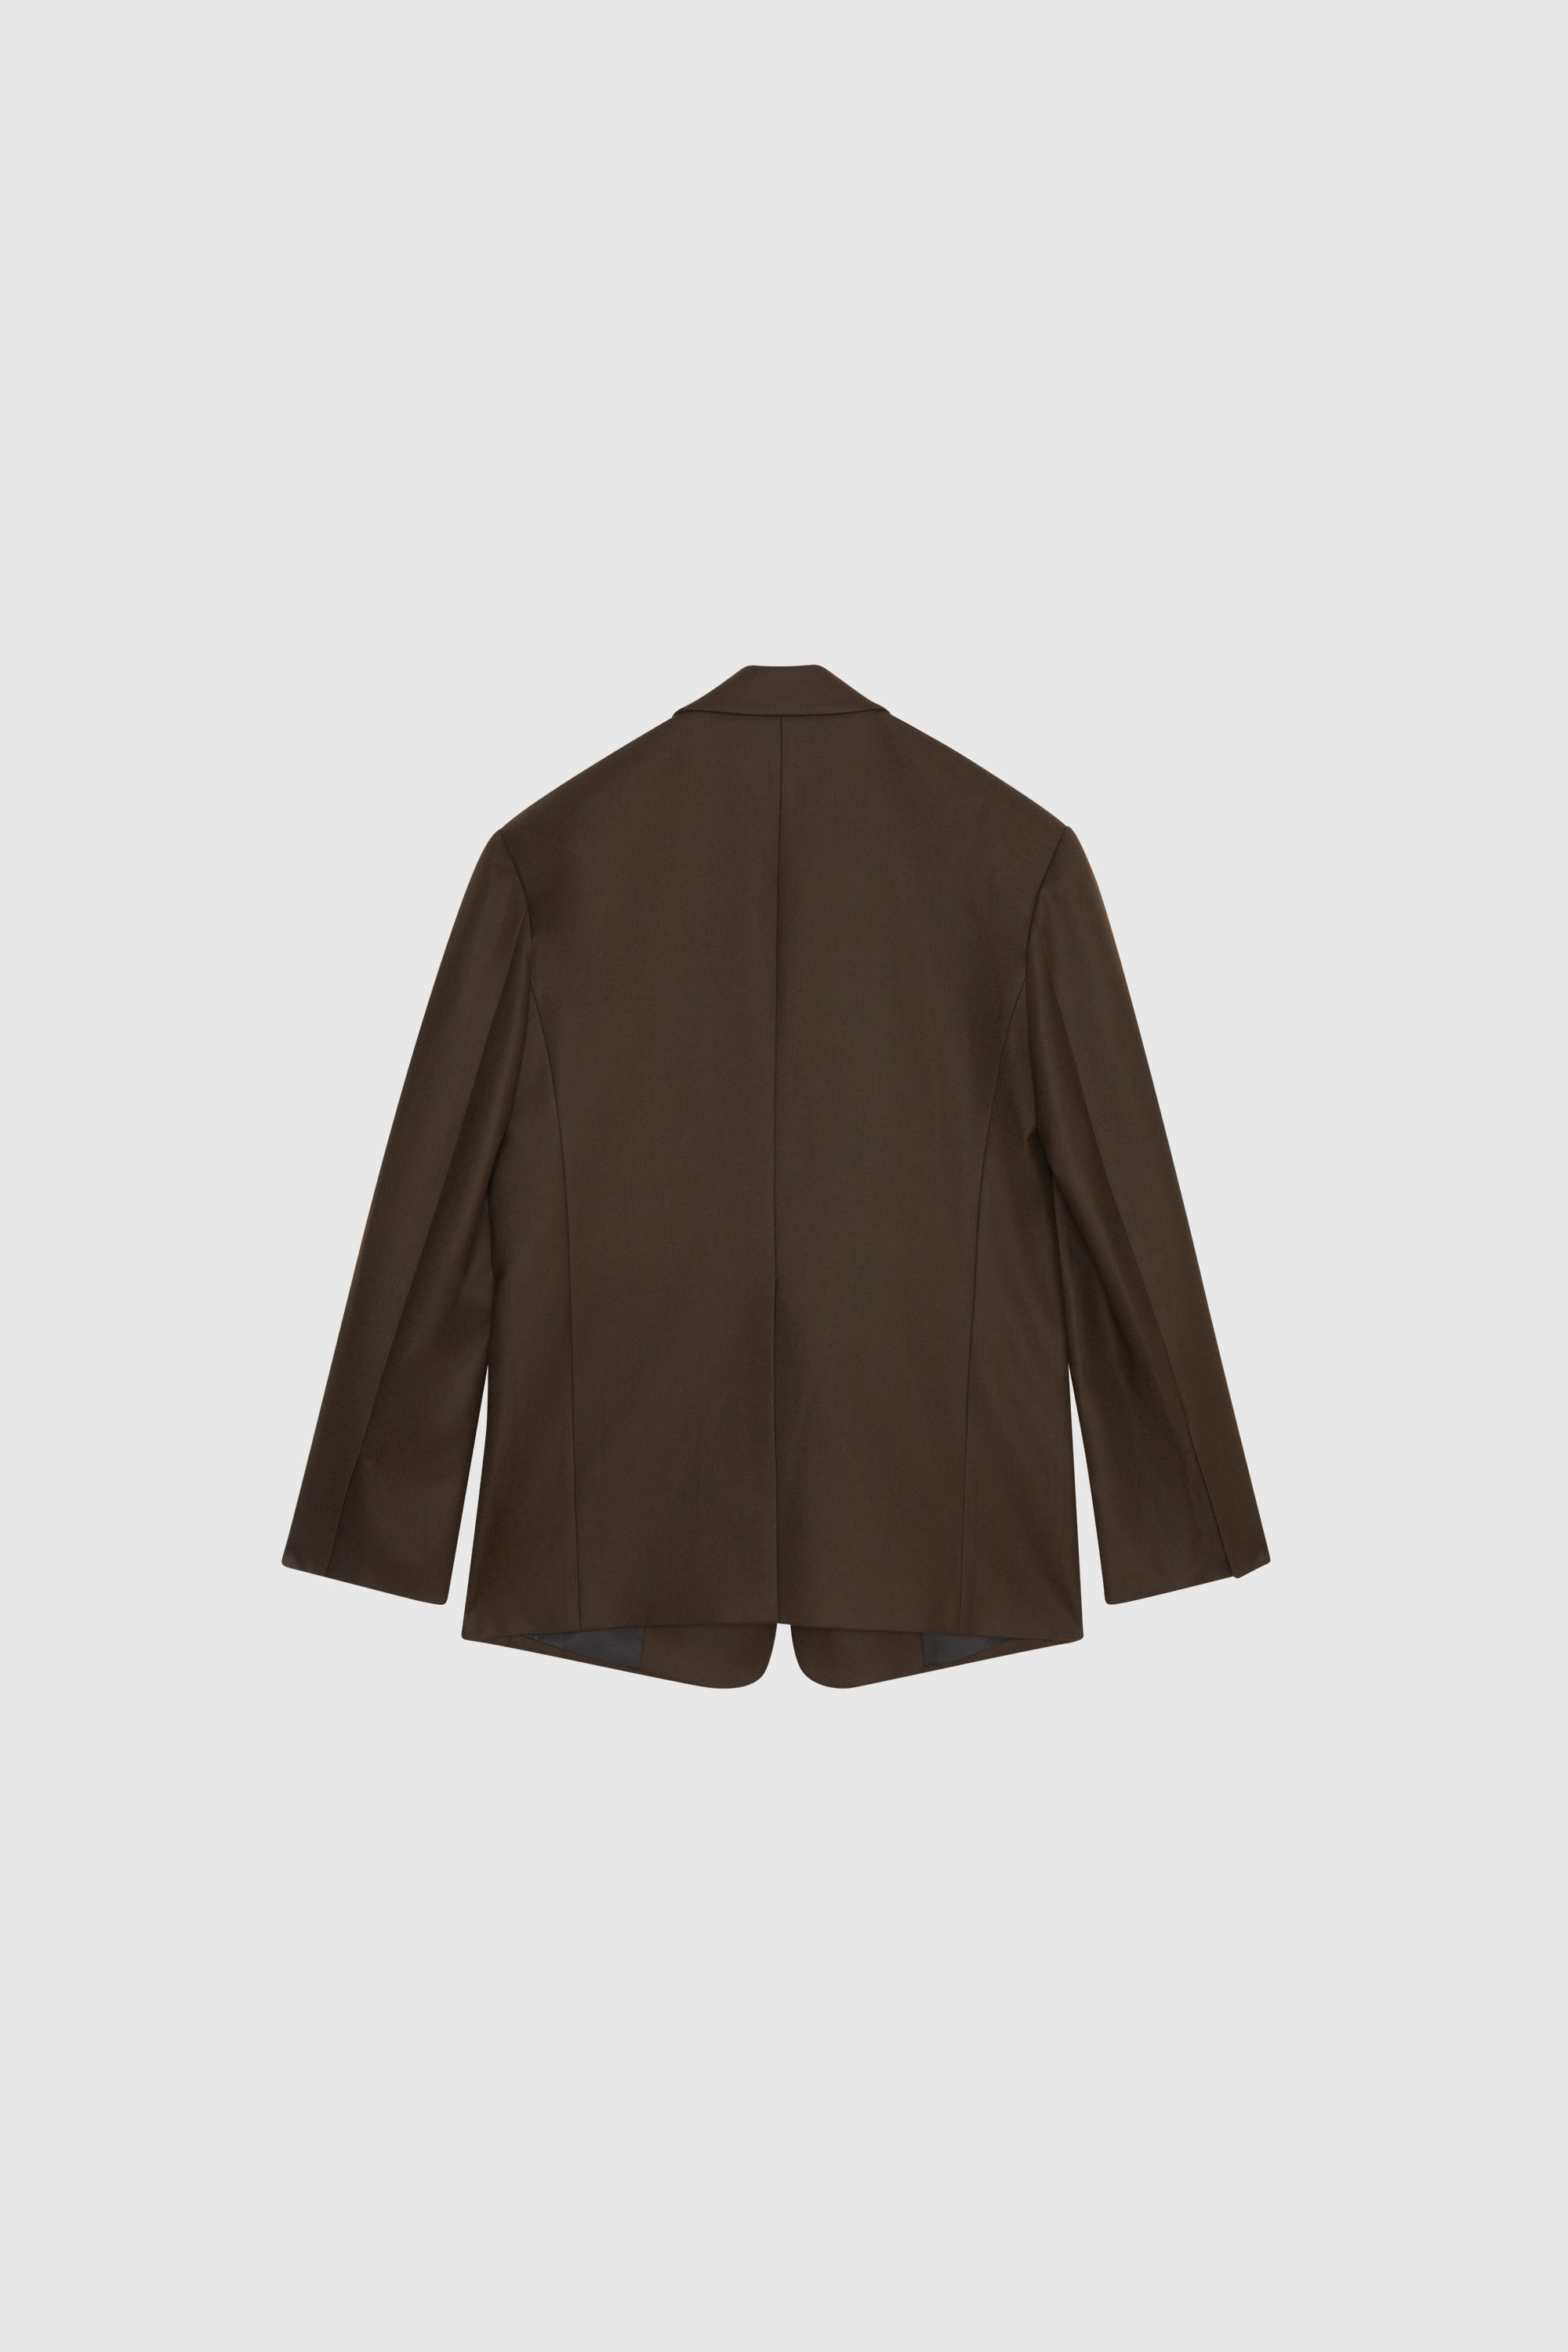 SYSTEM Double Breasted Wool Jacket Dark brown | WoodWood.com